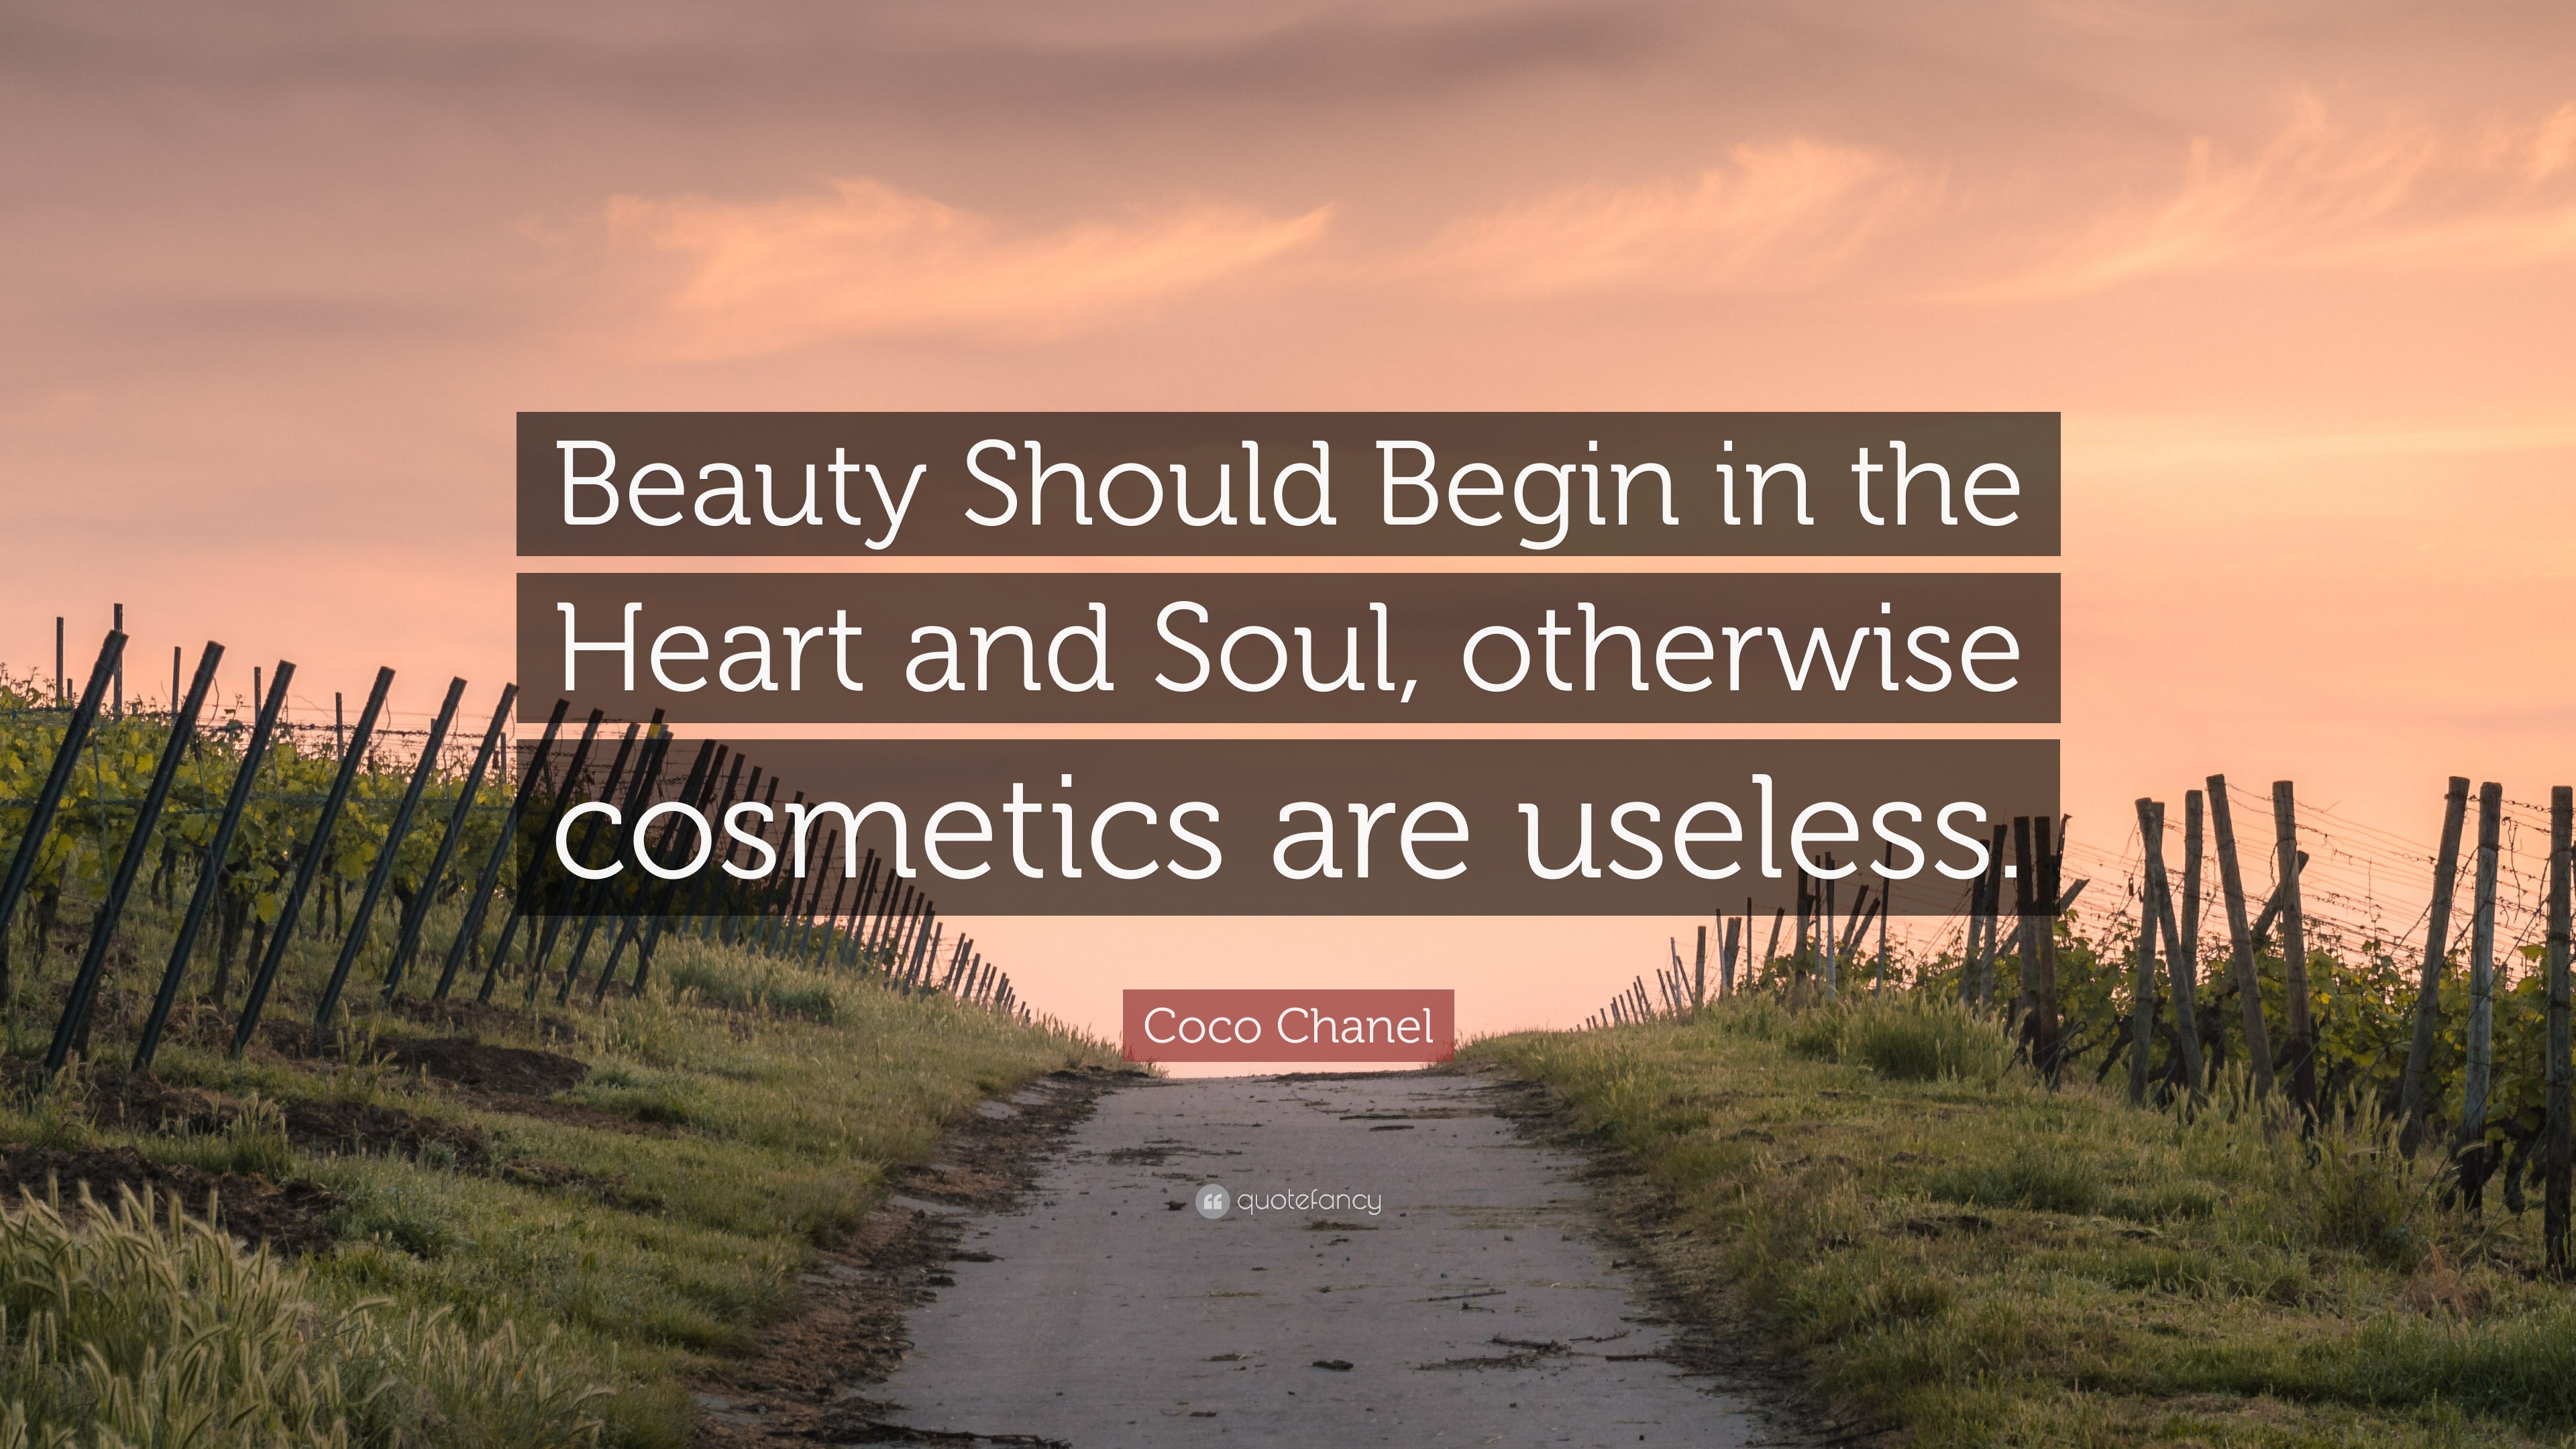 Coco Chanel Quote: “Beauty Should Begin in the Heart and Soul, otherwise  cosmetics are useless.”